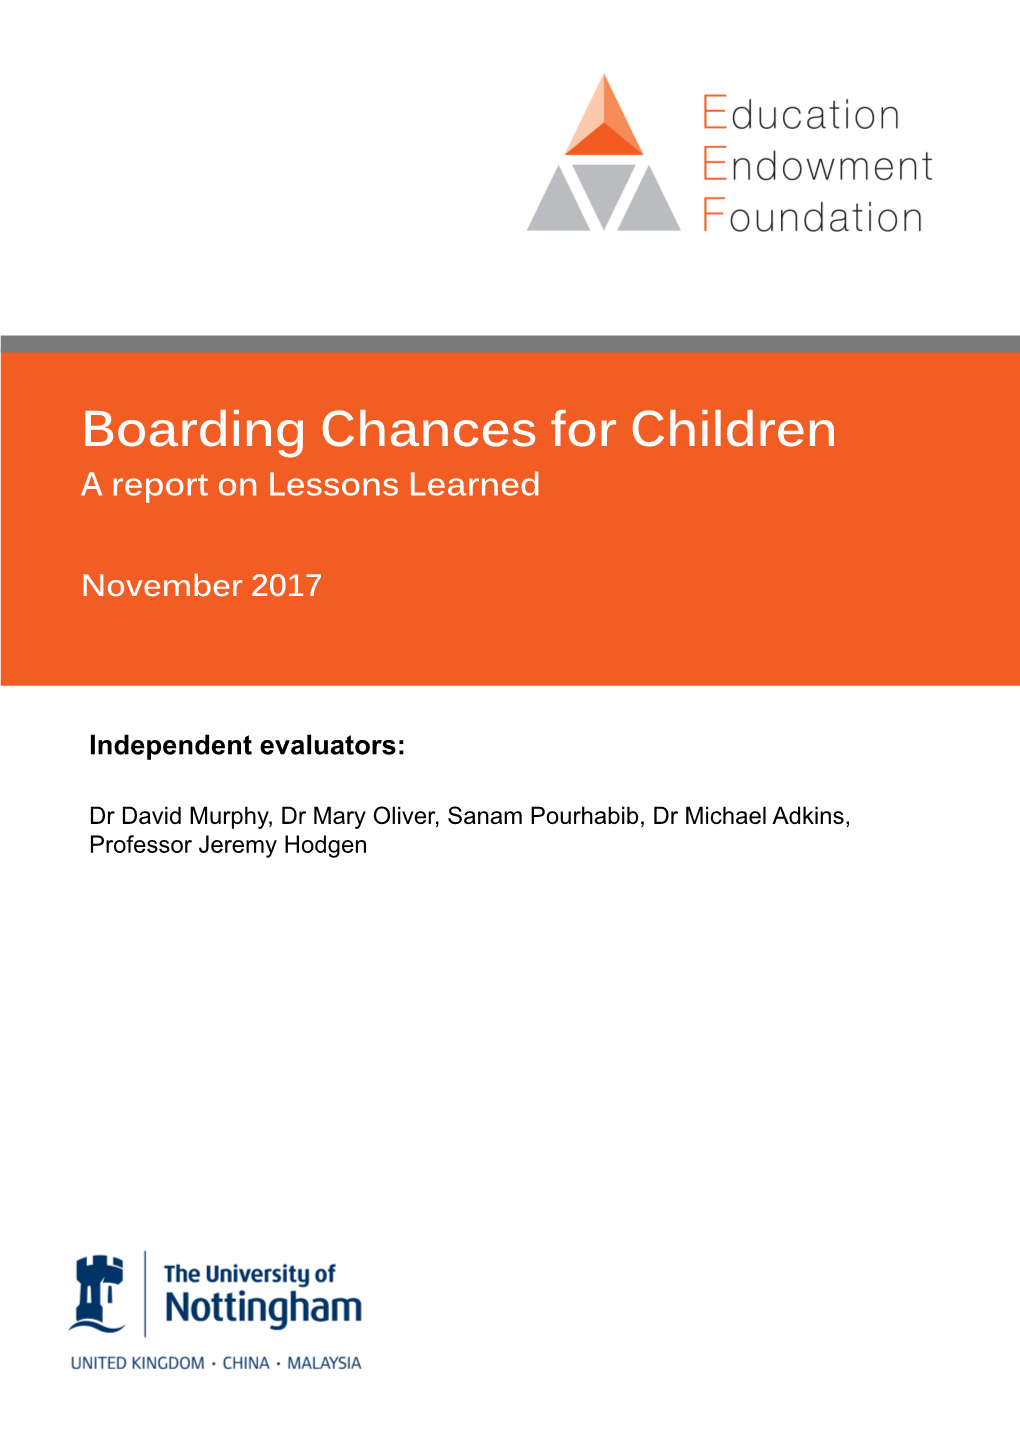 Boarding Chances for Children: a Report on Lessons Learned